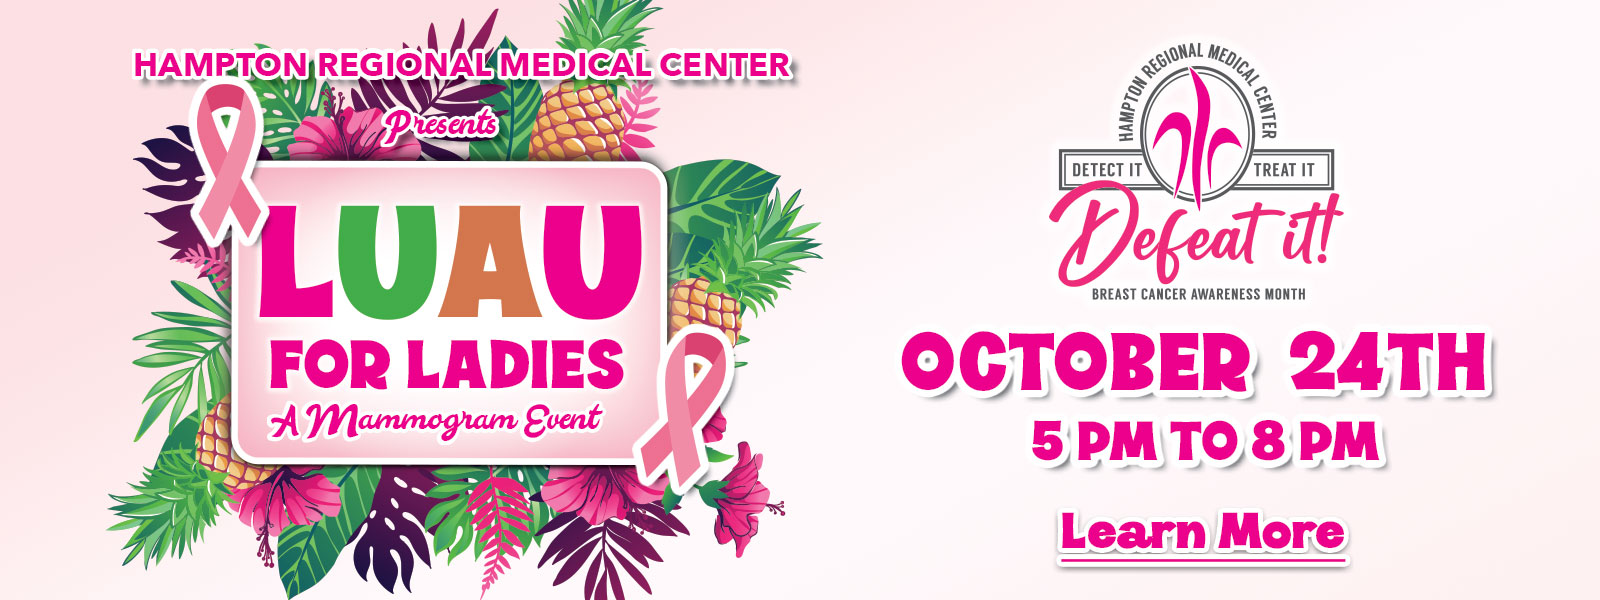 Hampton Regional Medical Center presents Luau for Ladies
A Mammogram Event

October 24th
5pm-8pm

Learn More by Clicking Here